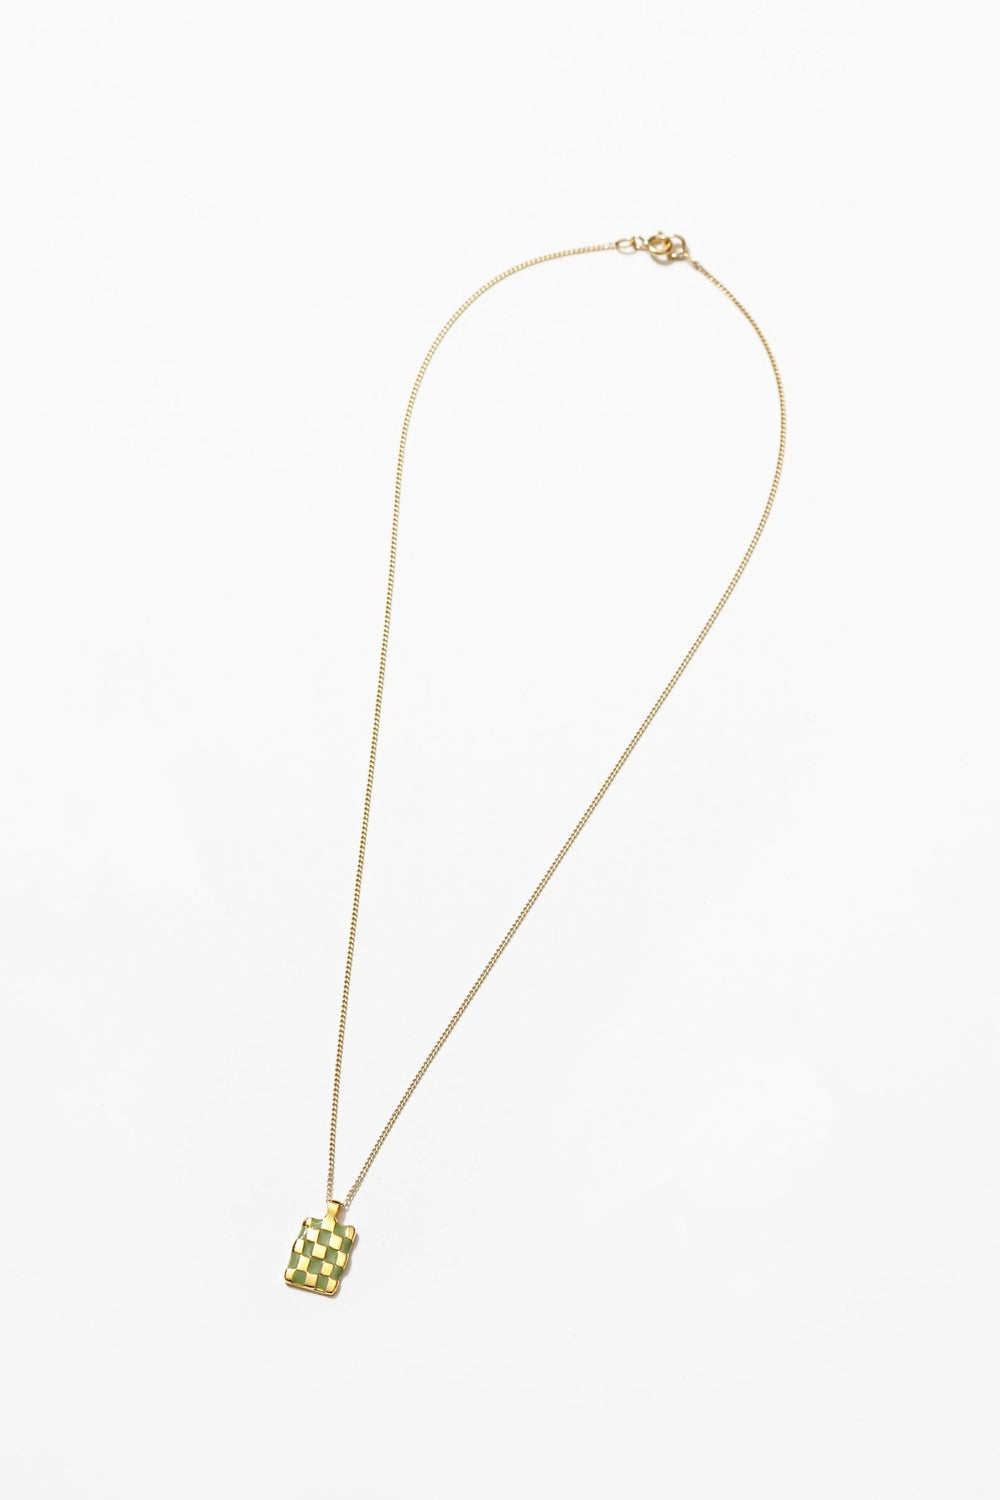 Green + Gold Penny Necklace